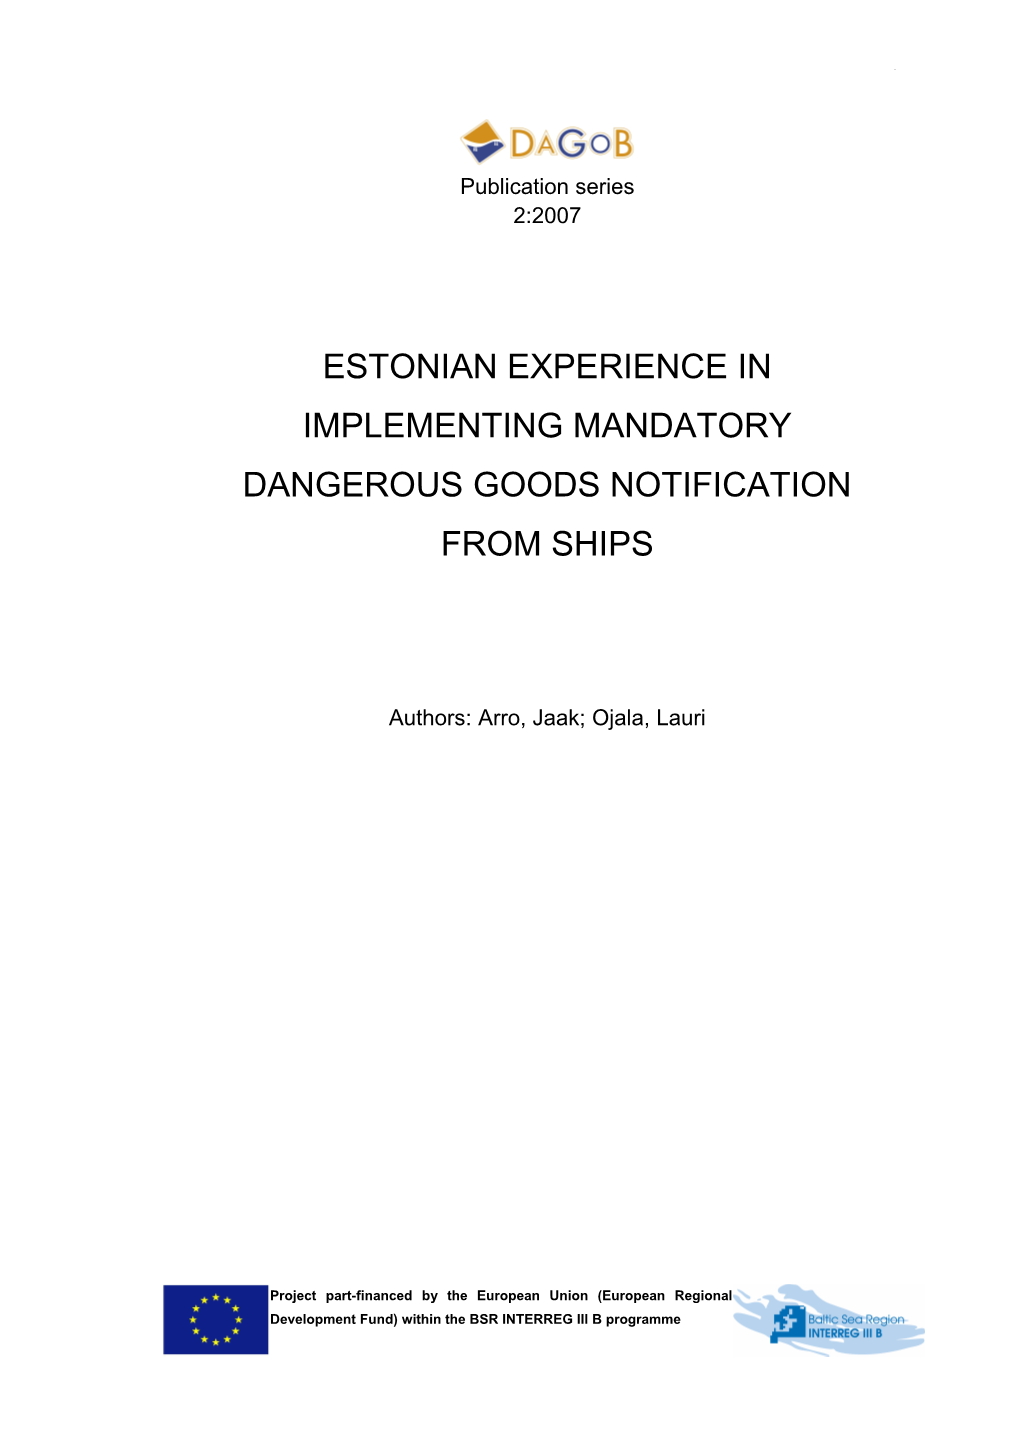 Estonian Experience in Implementing Mandatory Dangerous Goods Notification from Ships